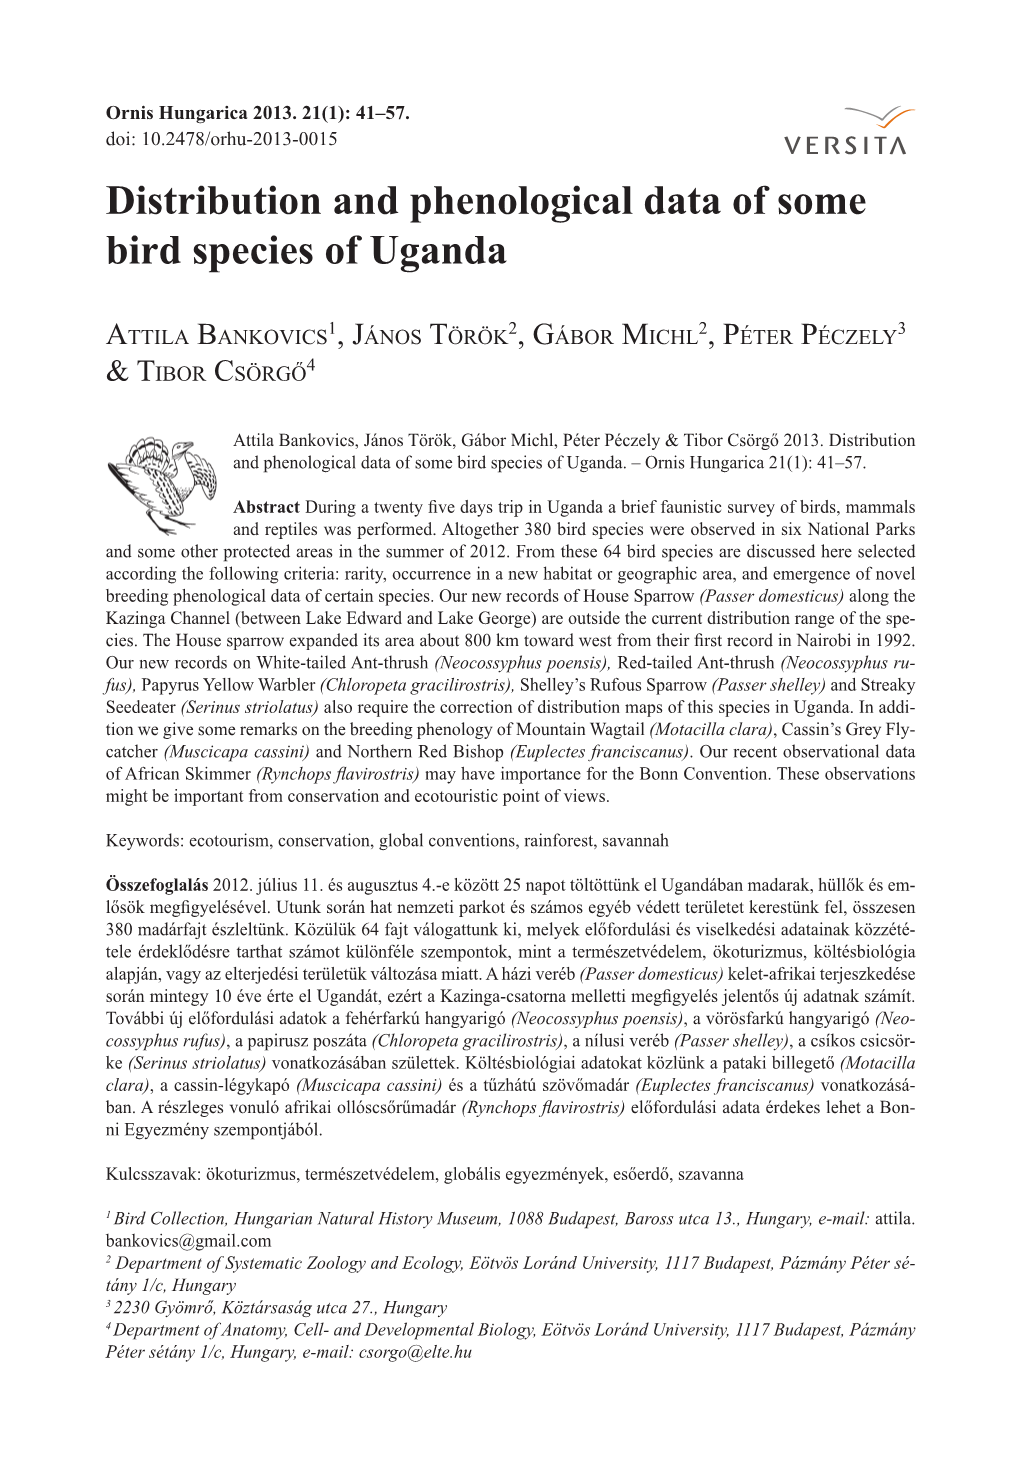 Distribution and Phenological Data of Some Bird Species of Uganda